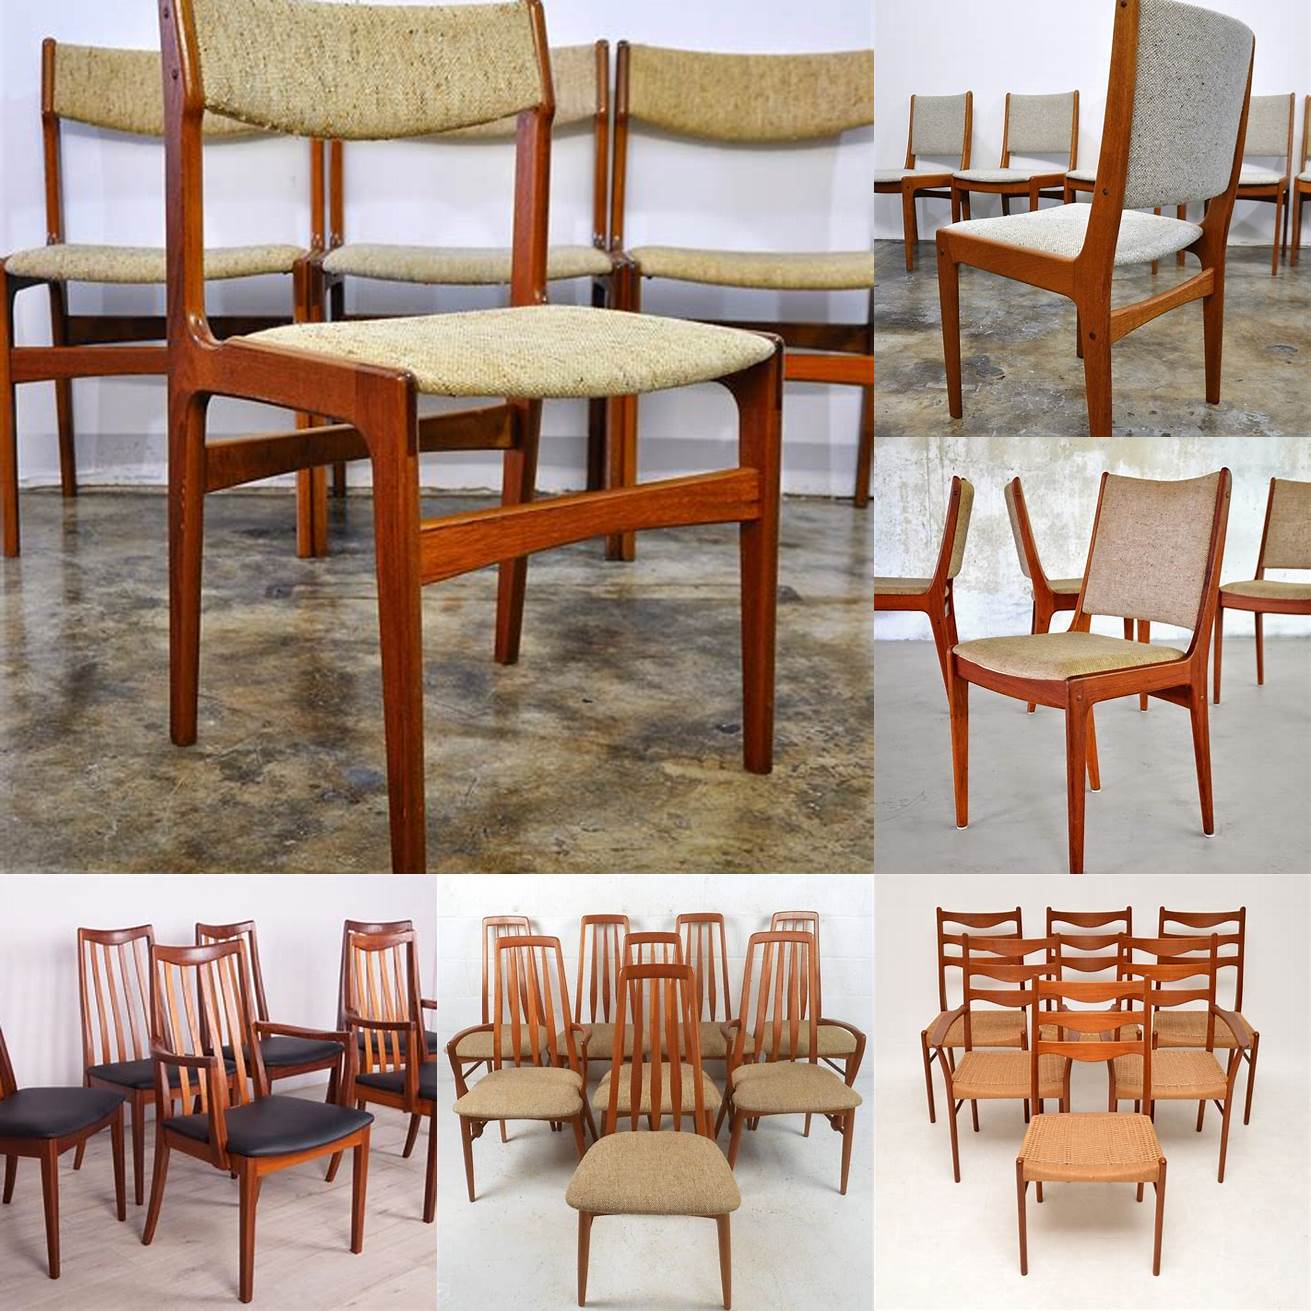 A picture of a dining chair made of teak